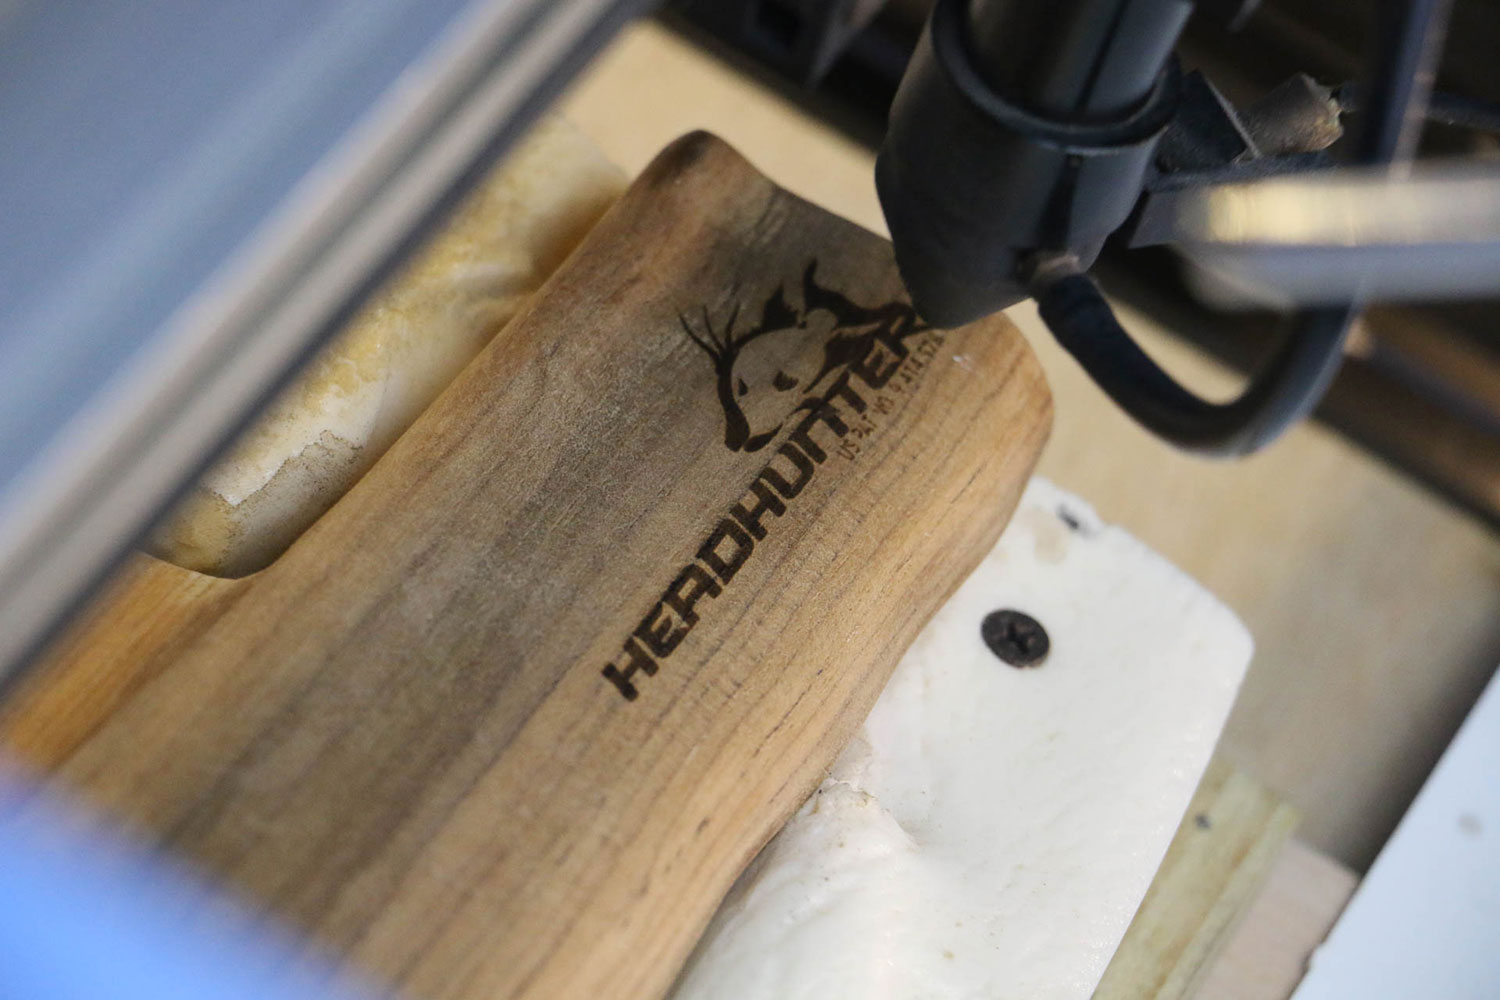 lasered Headhunter brand being engraved on handle of product.